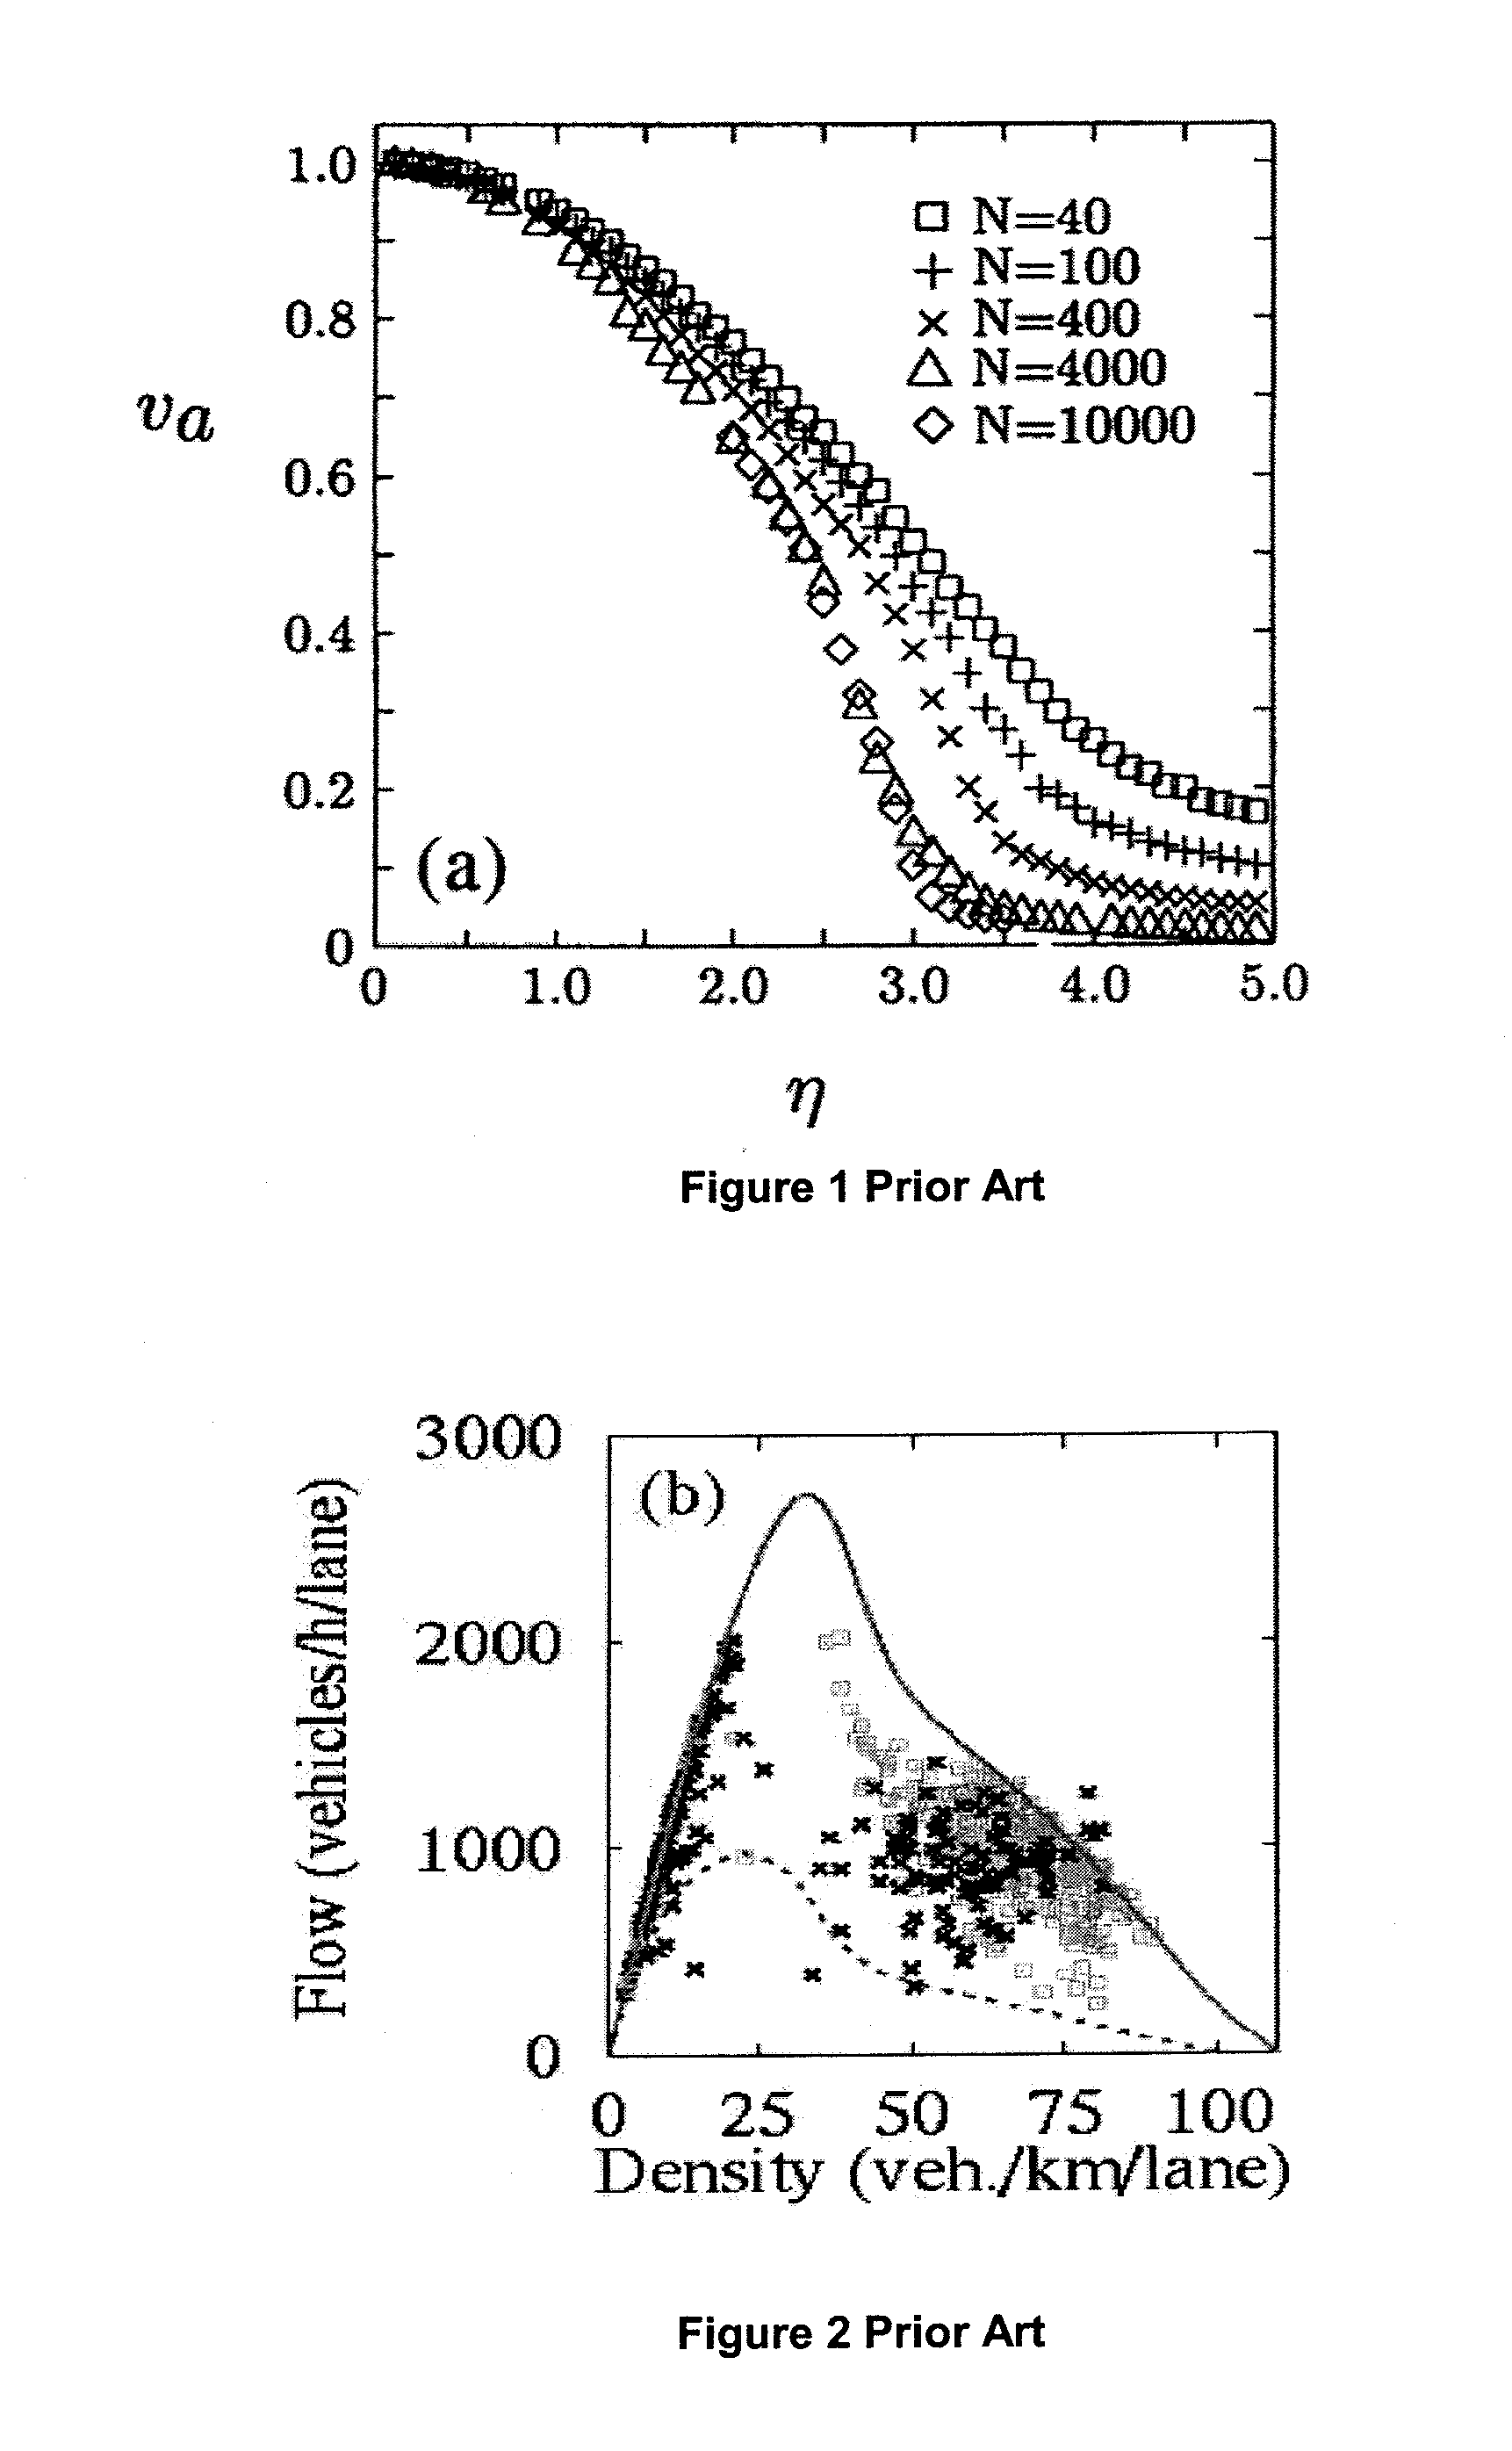 System and Method for Planning, Disruption Management, and Optimization of Networked, Scheduled or On-Demand Air Transport Fleet Trajectory Operations